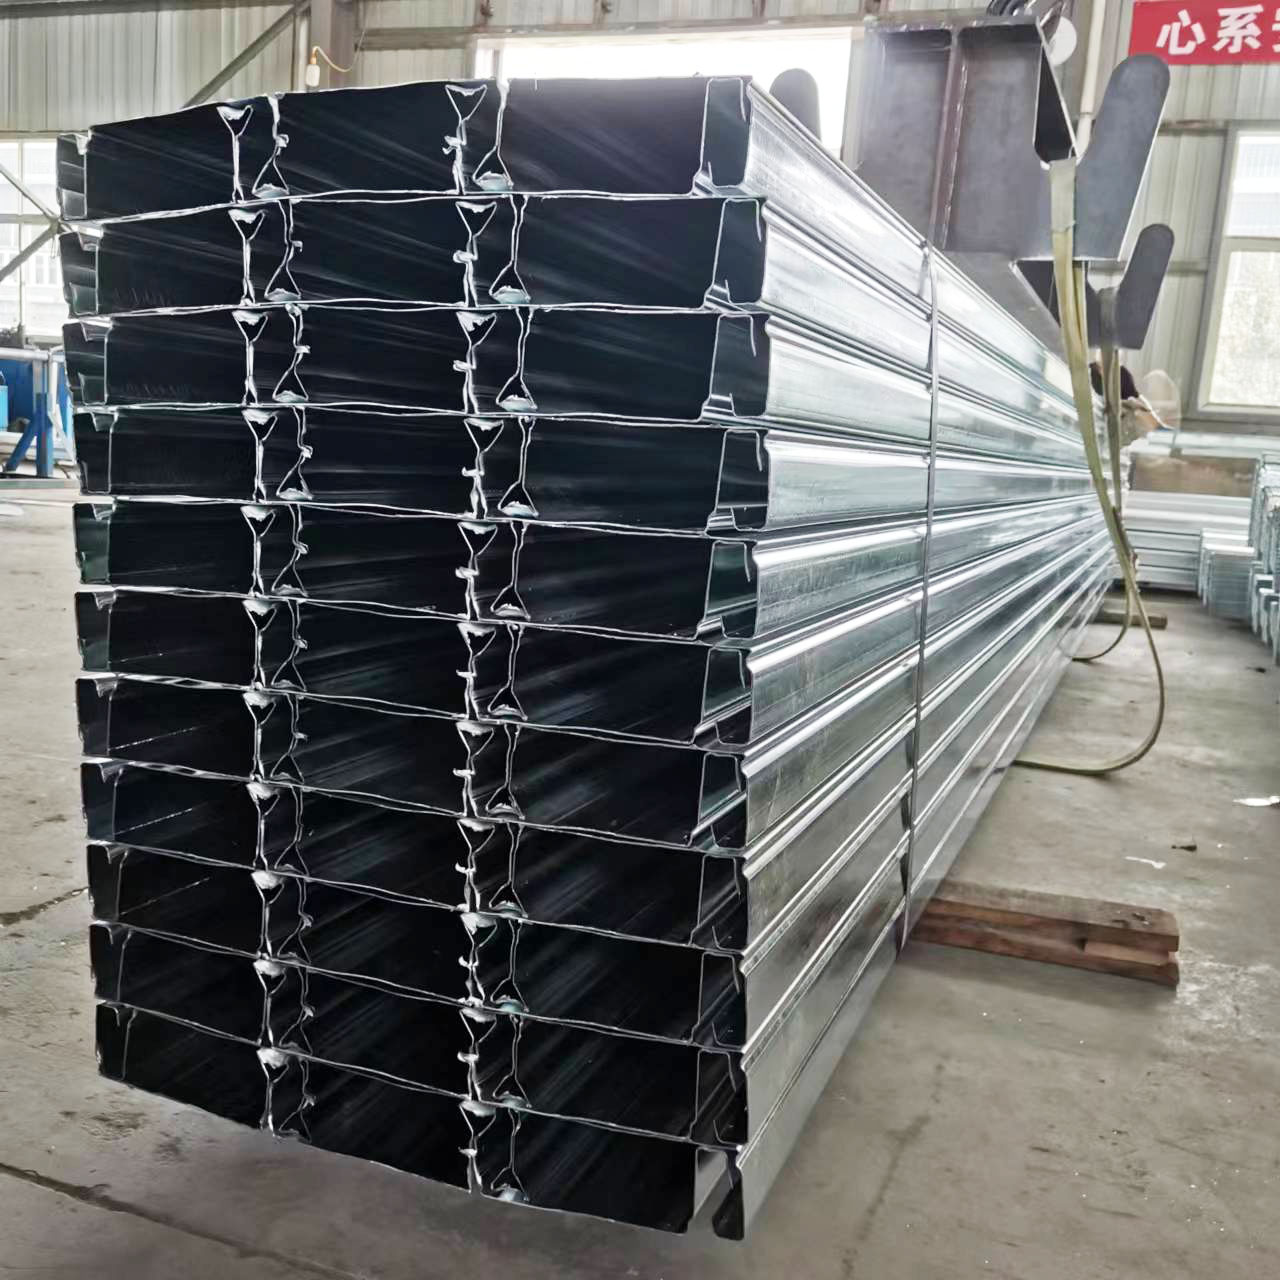 Manufacturing Companies for Galvanised Steel Roof - YX65-170-510 bearing Plate of closed floor from China – Bi Lan Tian